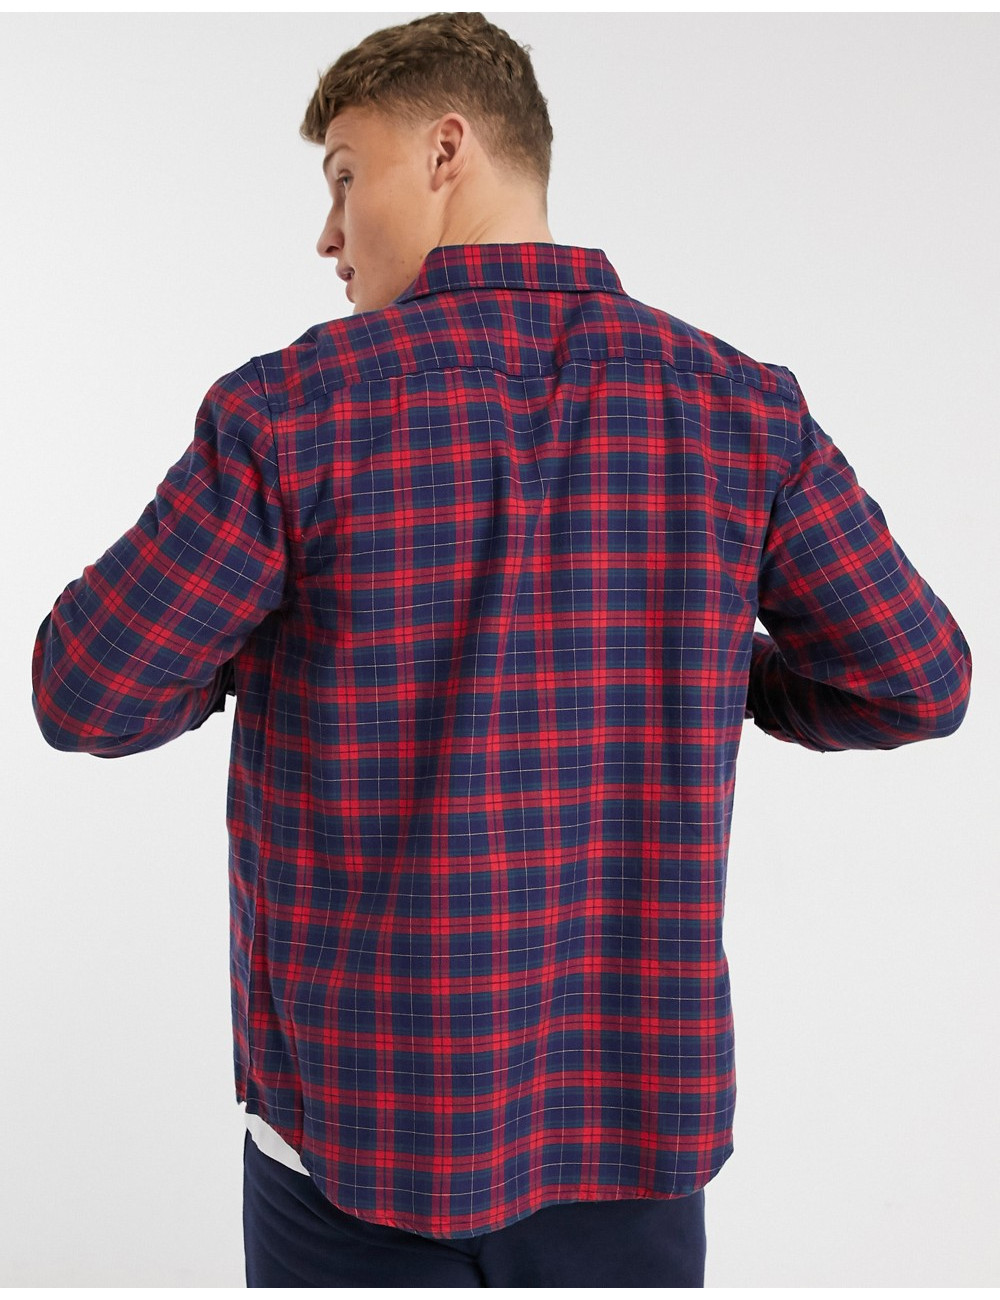 New Look check shirt in red...